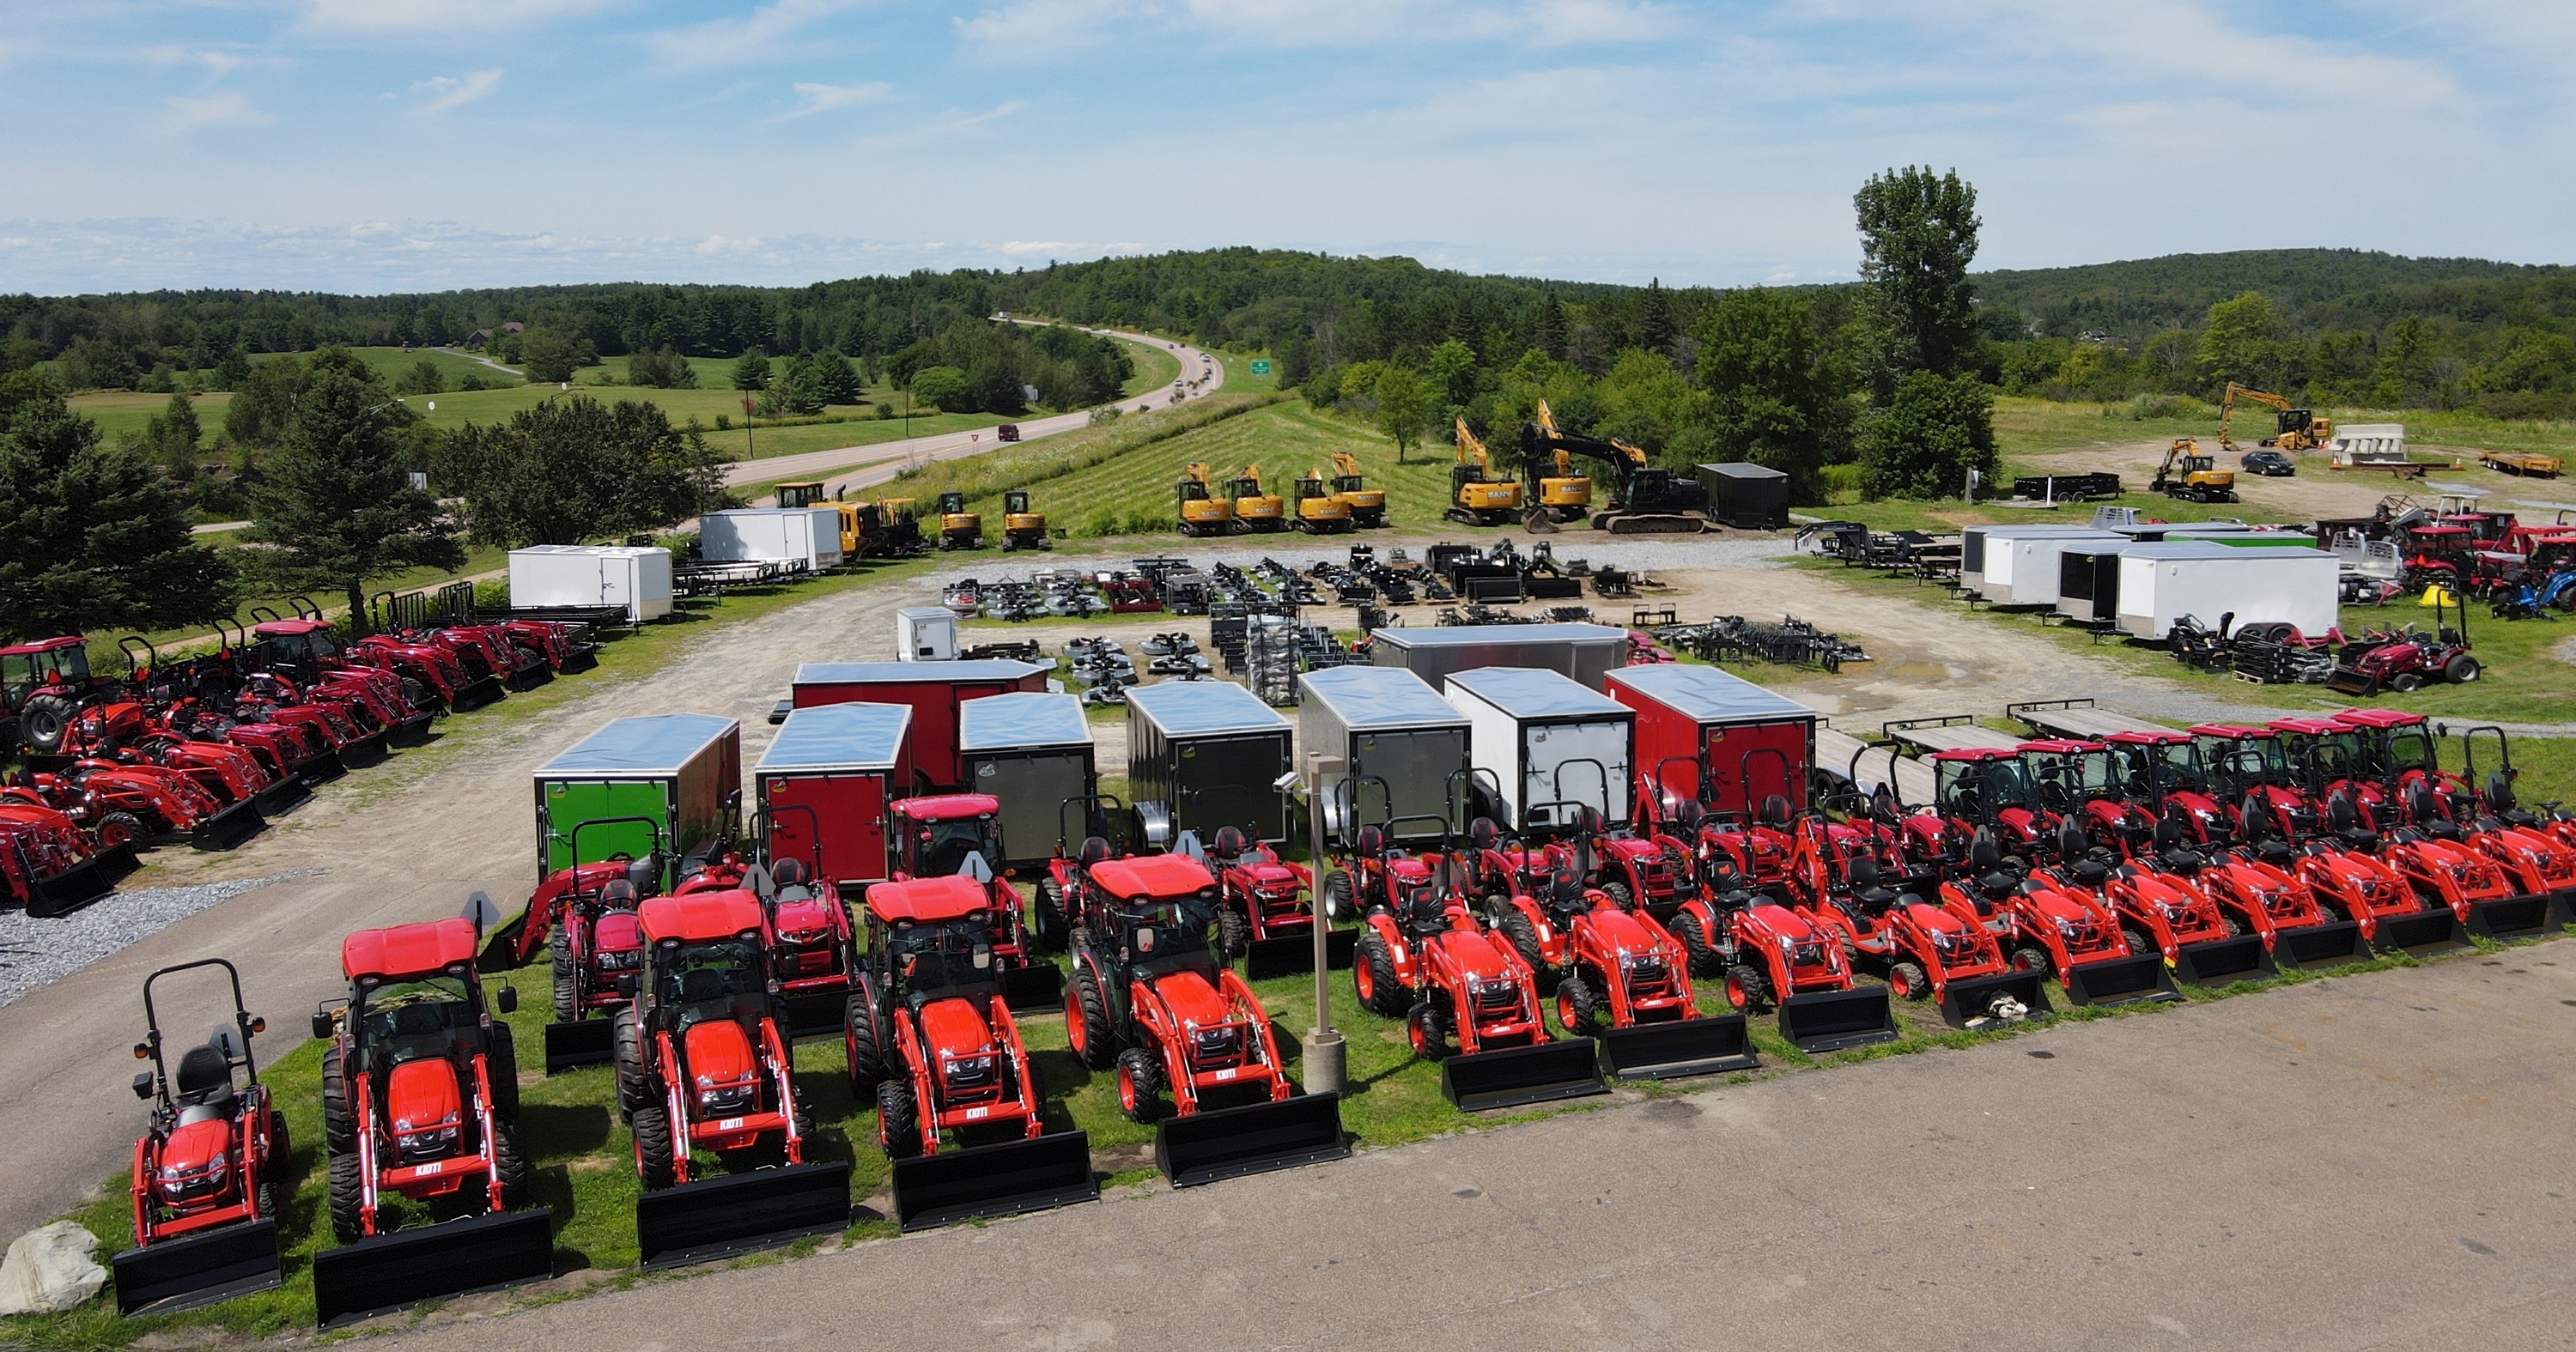 2021 Mahindra Tractors for sale at CCR Sales and Service,  Essex Junction, Vermont